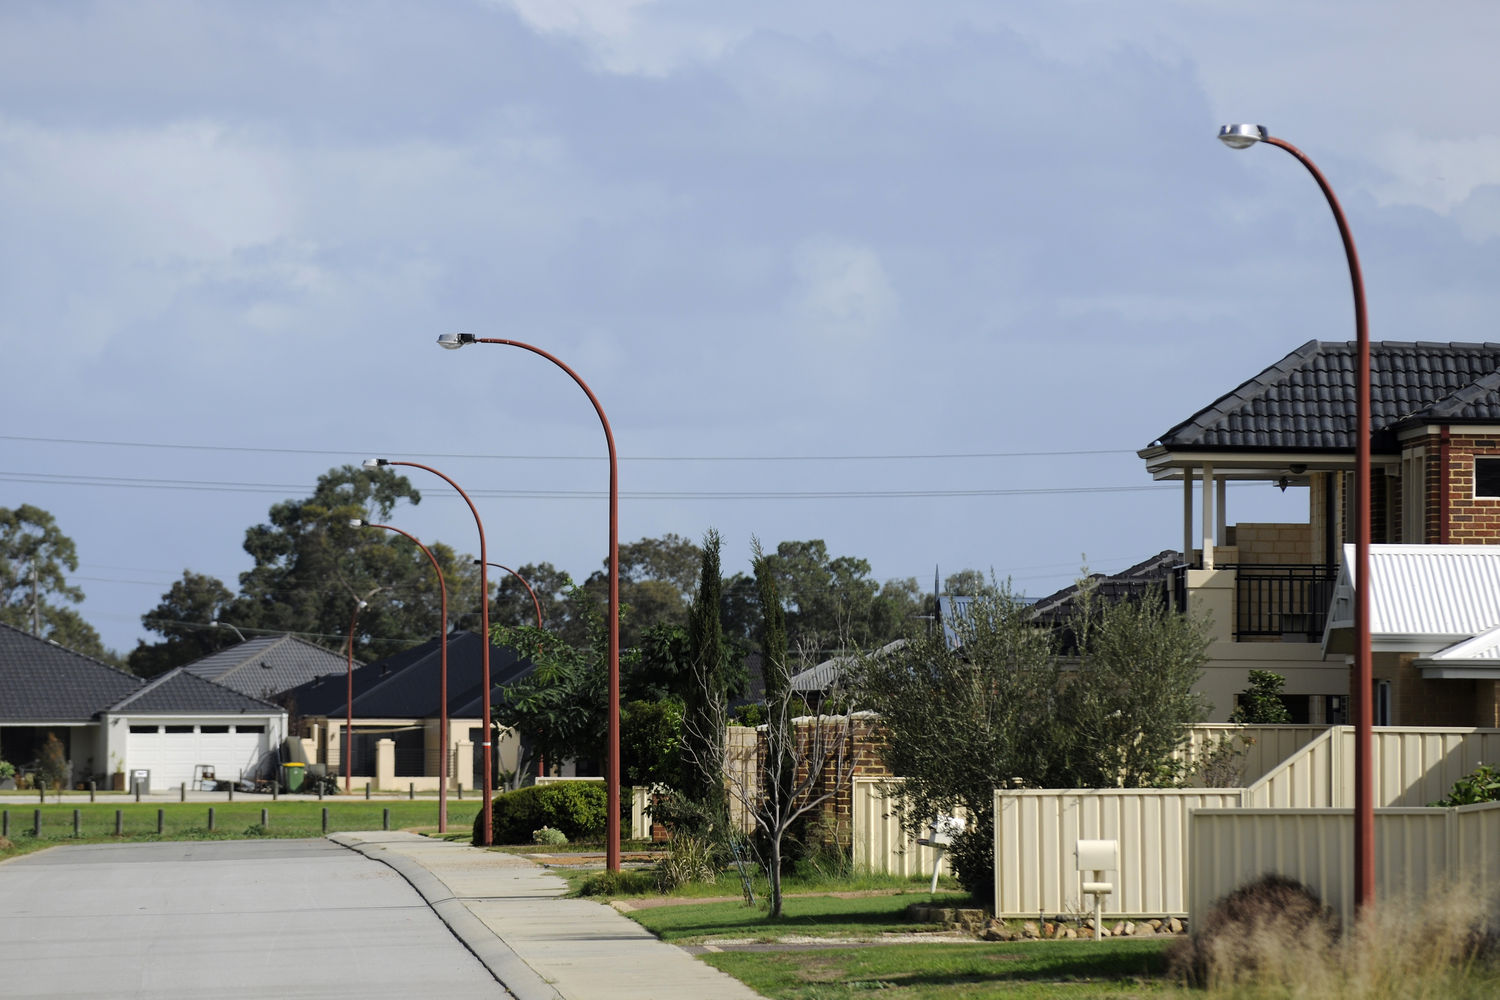 View of Wattle Grove residential area showing road and verge